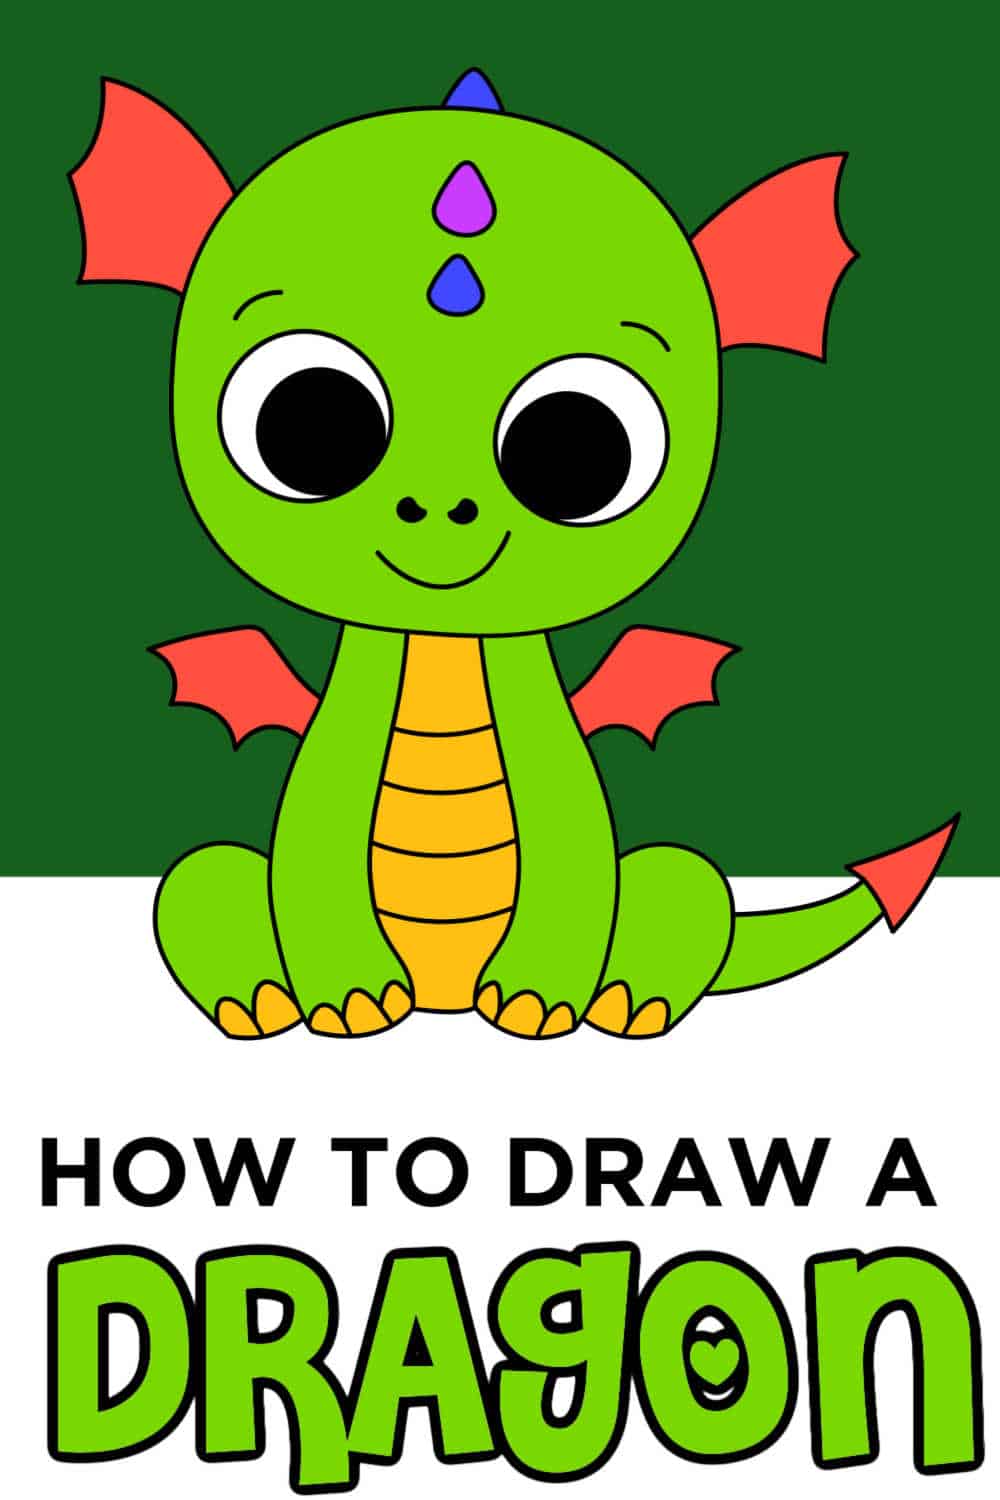 Get sketching with fun drawing ideas for kids - Gathered